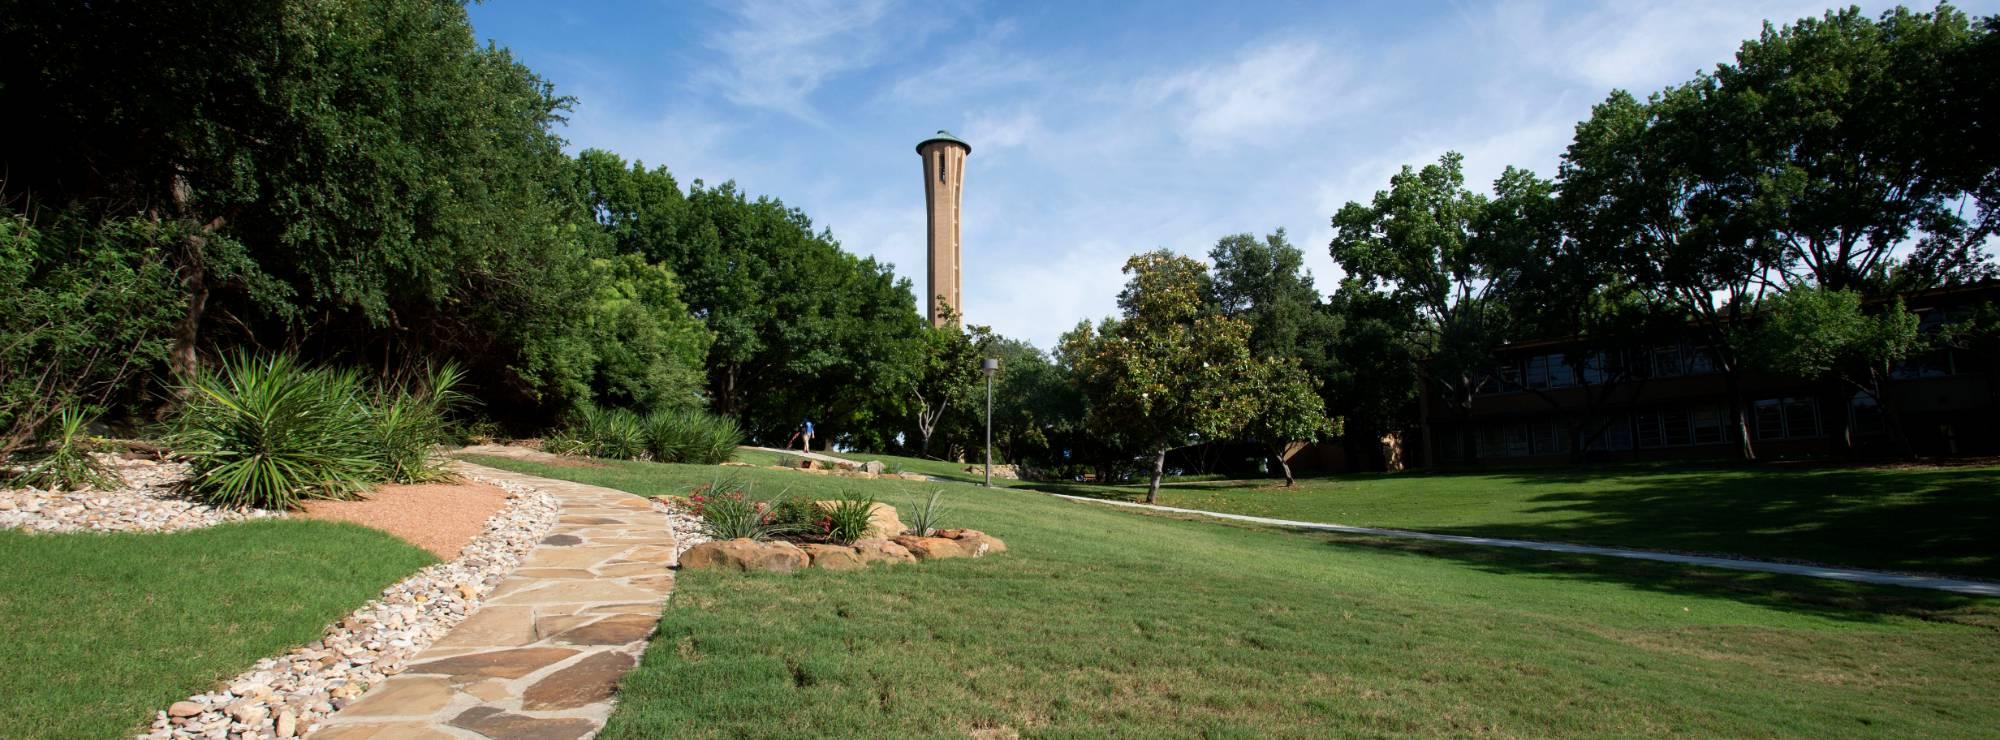 Tower and campus